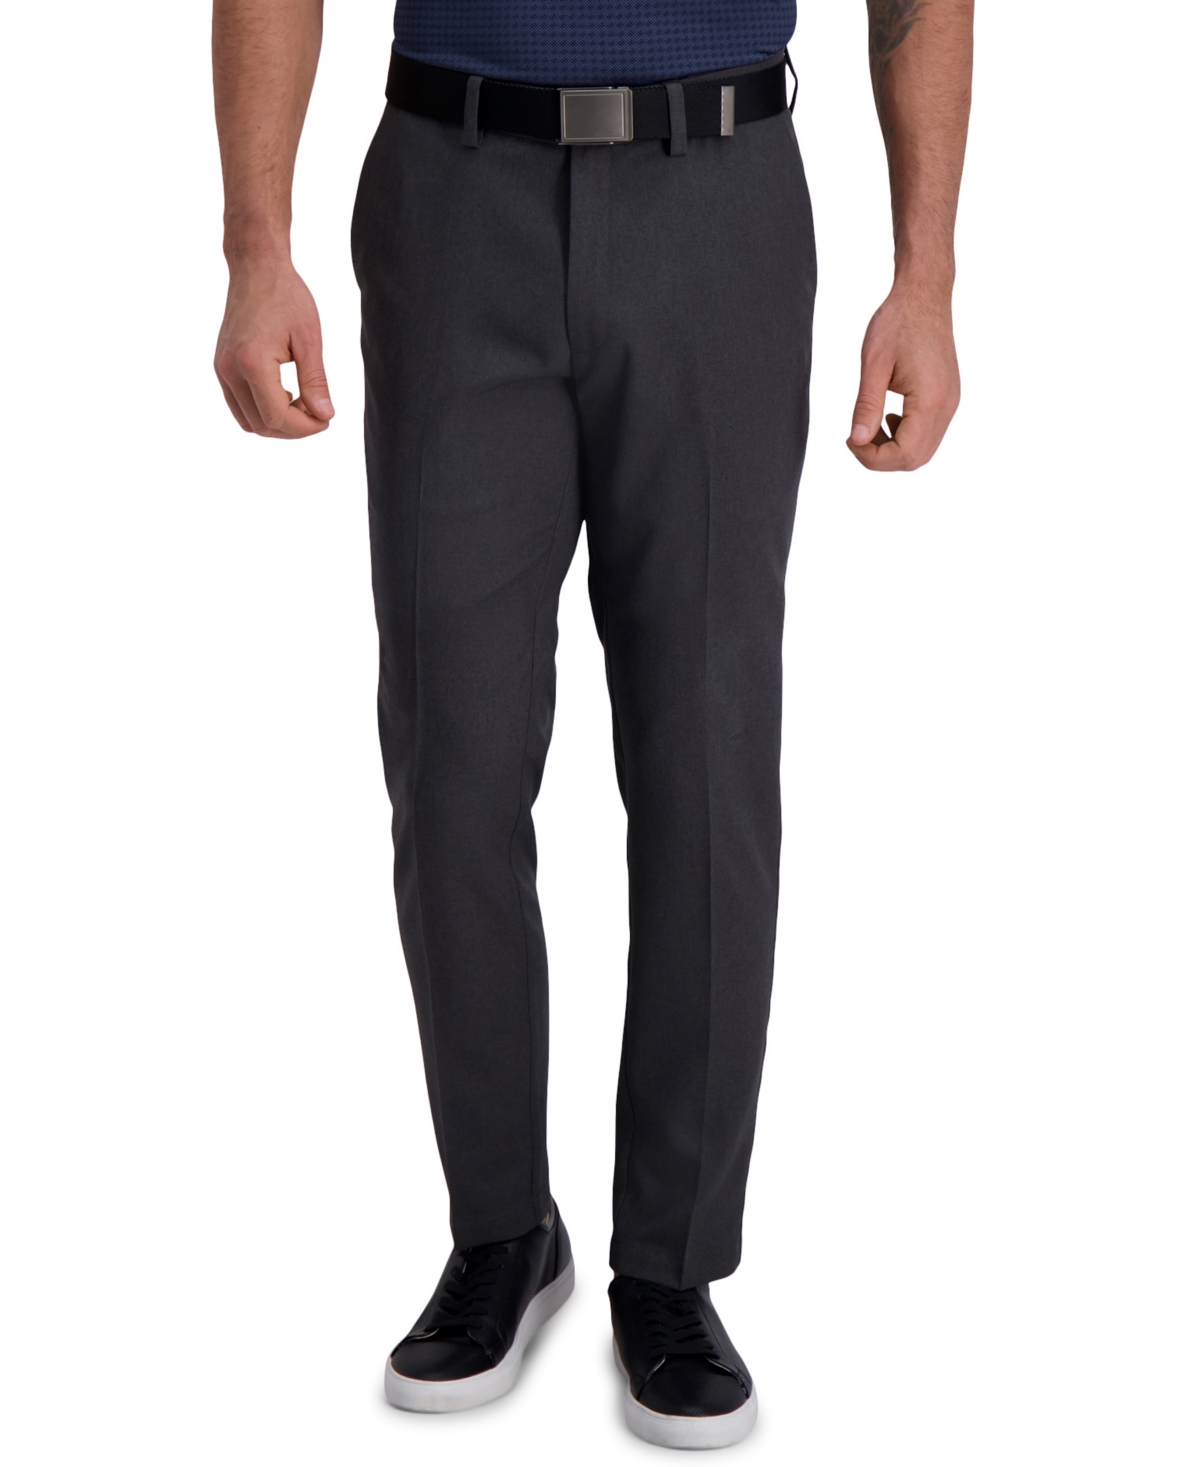 Cool Right Performance Flex Slim Fit Flat Front Pant - String